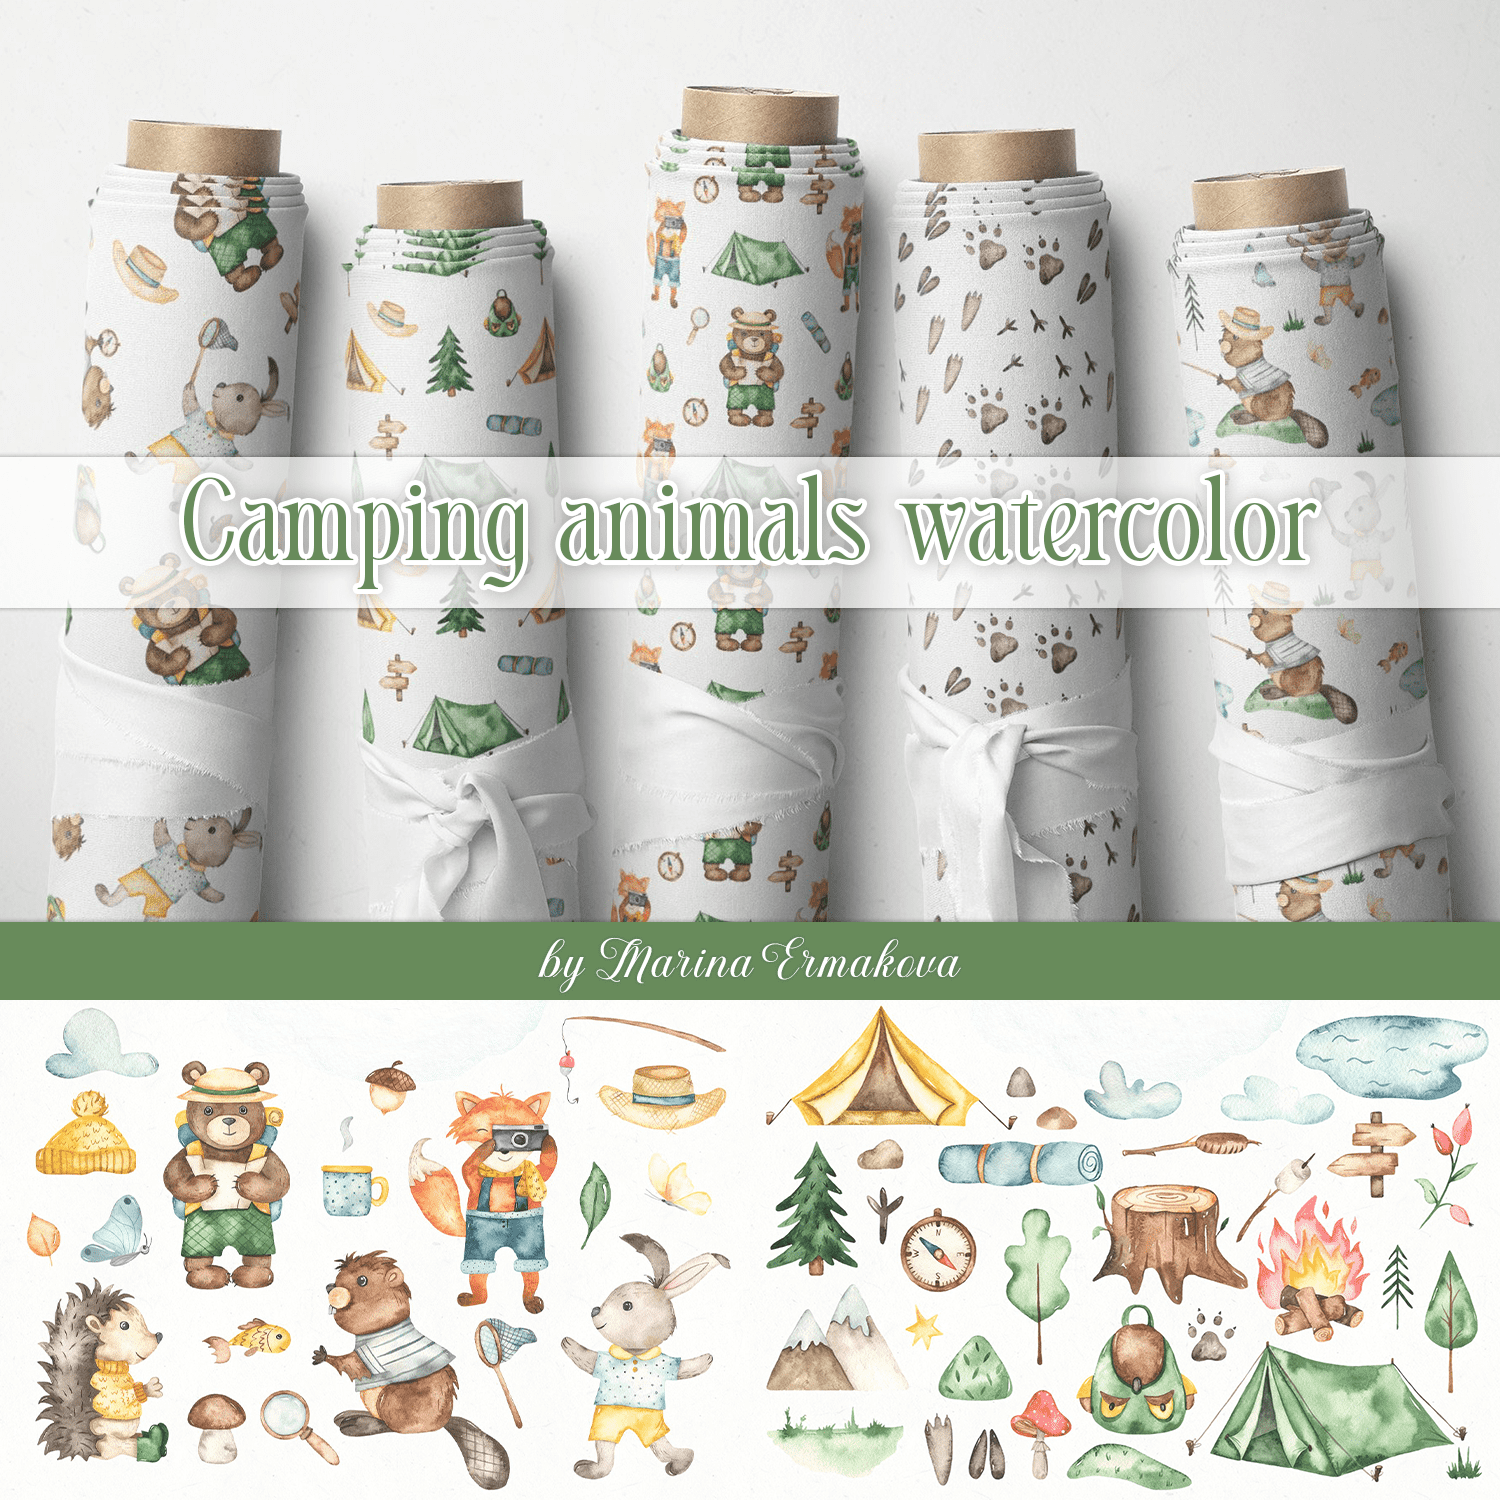 Camping animals watercolor cover.